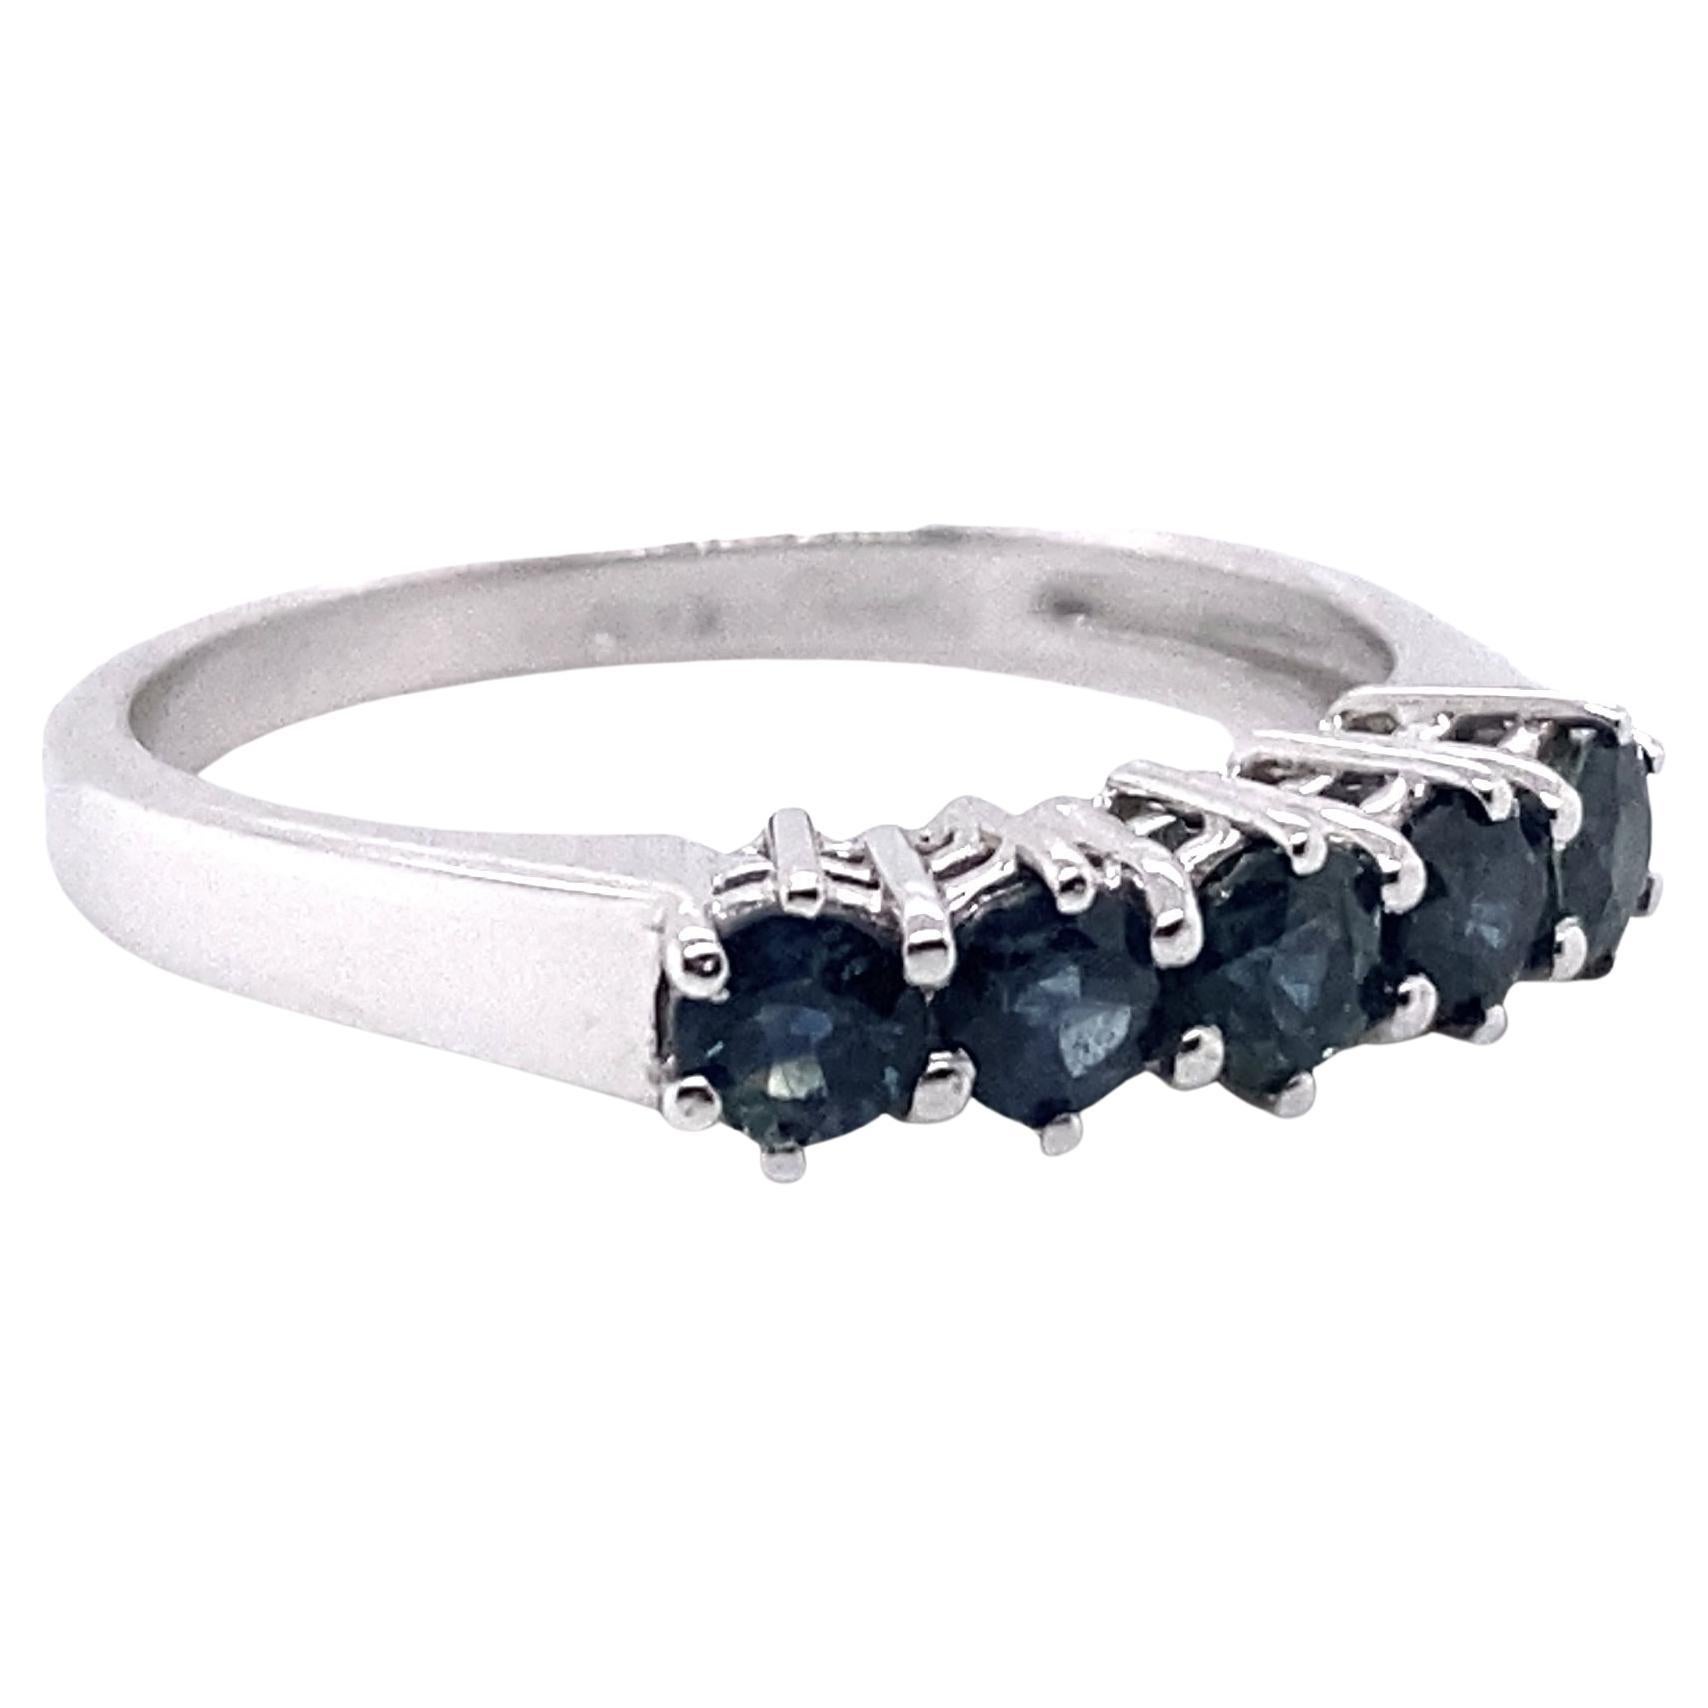 This ring has been masterfully created entirely by hand from 18-karat white gold and contains 5 single brilliant blue sapphires, weighing just under a carat.

The photographed ring is an EU 15/US 7.50 ring size. It can be re-made in any ring size on